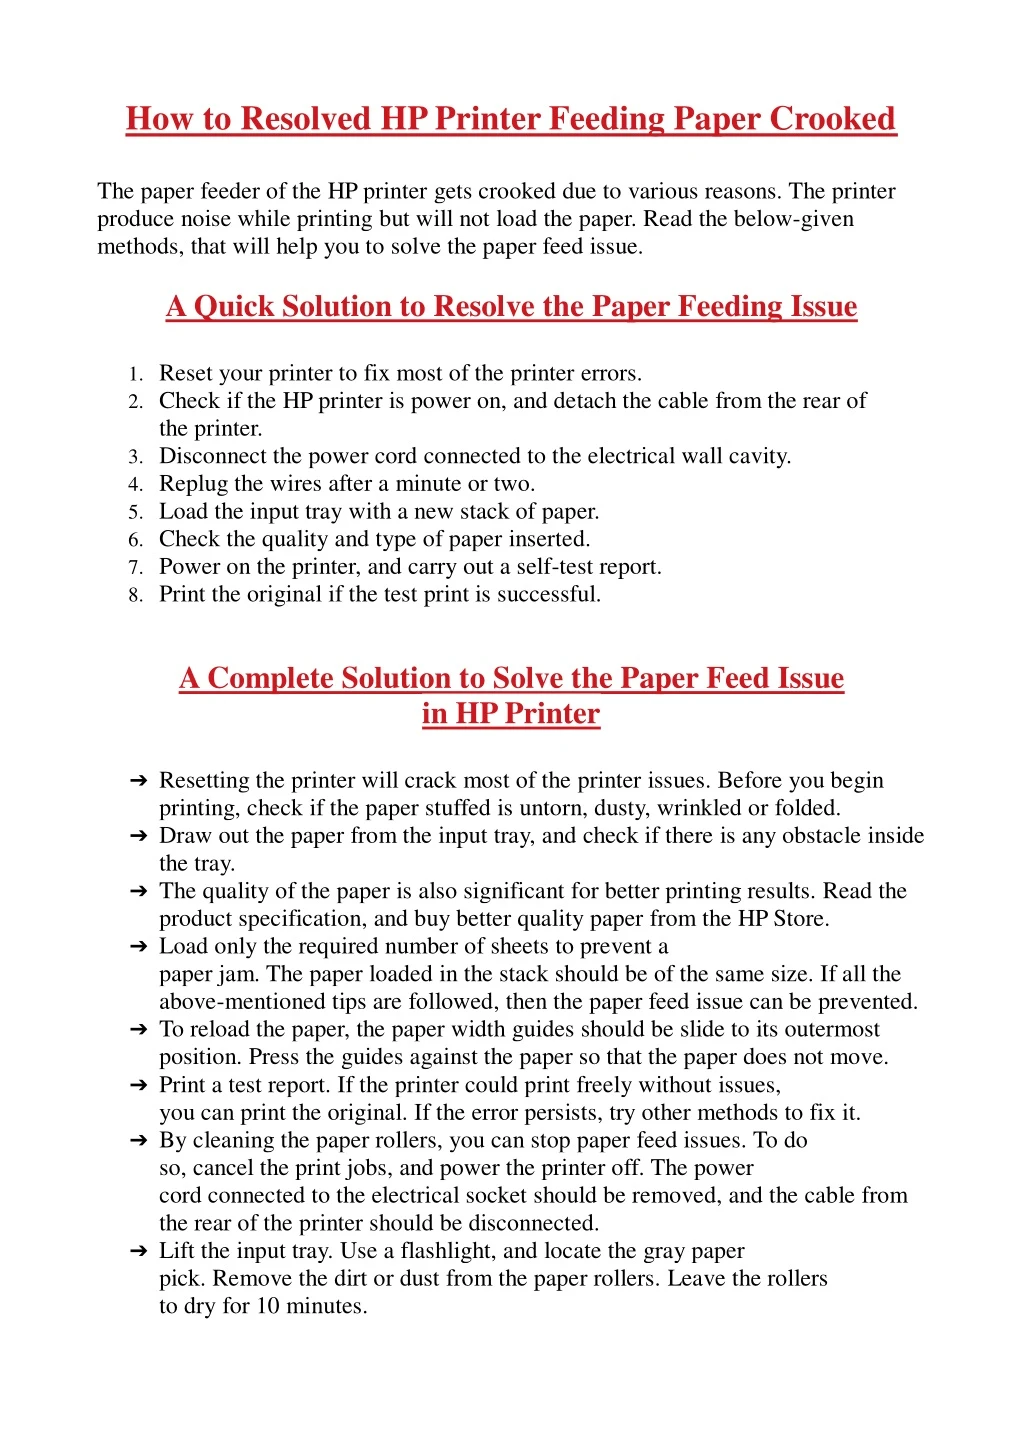 how to resolved hp printer feeding paper crooked